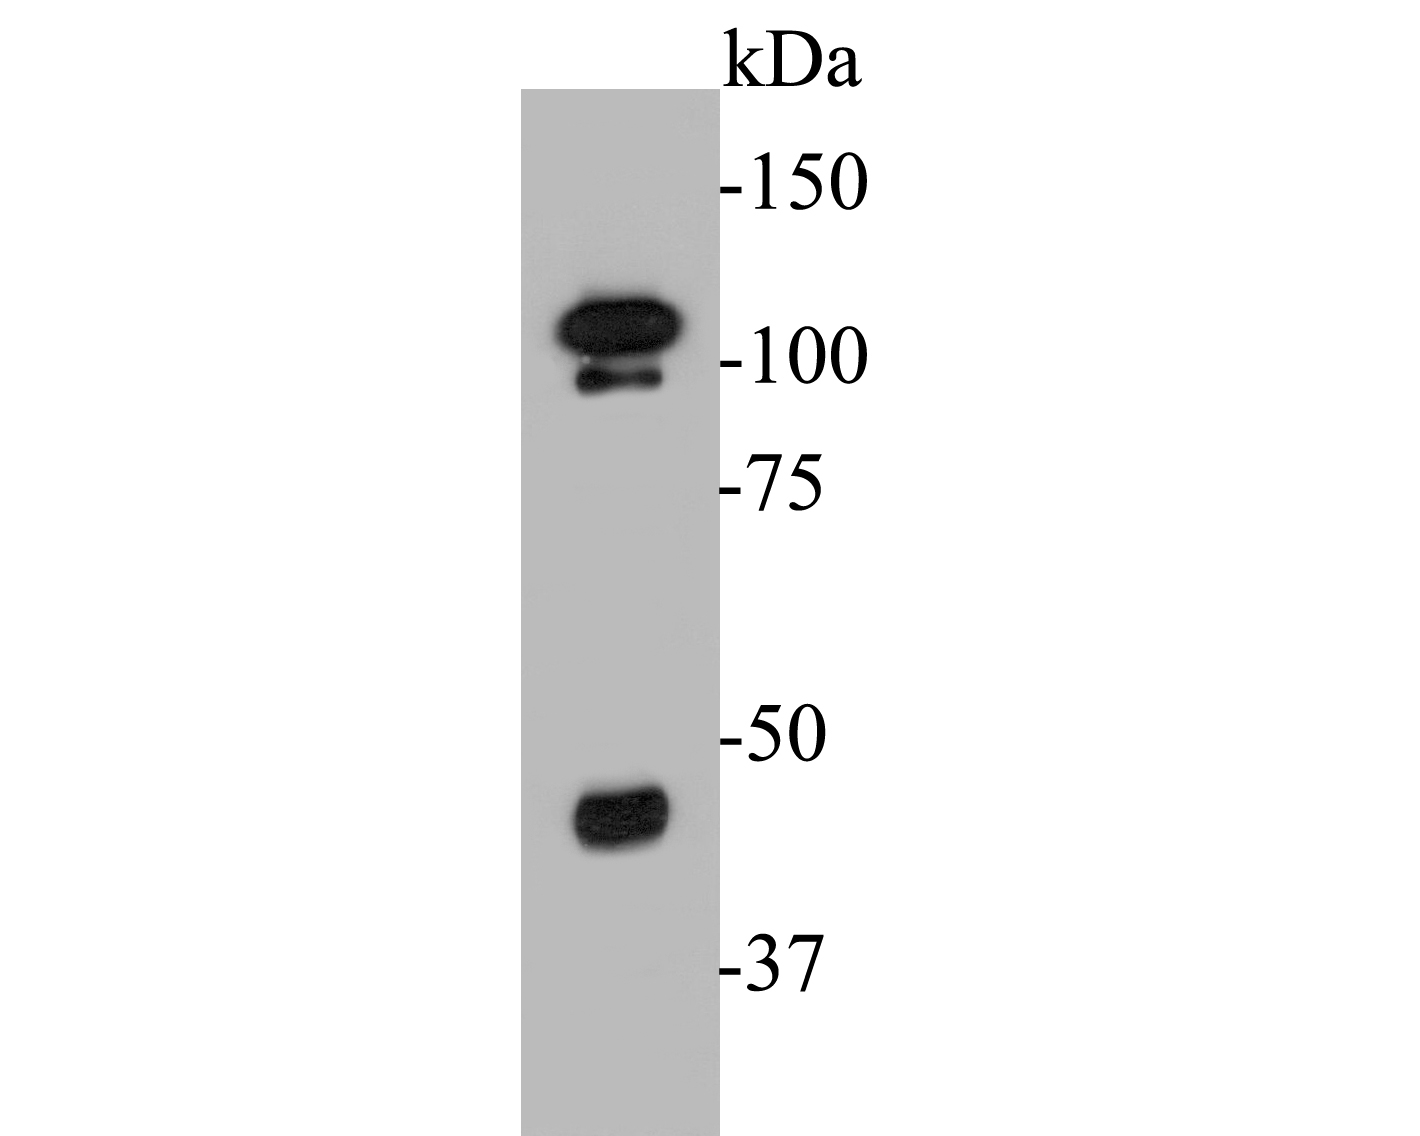 Western blot analysis of FoxP1 on mouse testis tissue lysates. Proteins were transferred to a PVDF membrane and blocked with 5% BSA in PBS for 1 hour at room temperature. The primary antibody (ER1901-25, 1/500) was used in 5% BSA at room temperature for 2 hours. Goat Anti-Rabbit IgG - HRP Secondary Antibody (HA1001) at 1:5,000 dilution was used for 1 hour at room temperature.